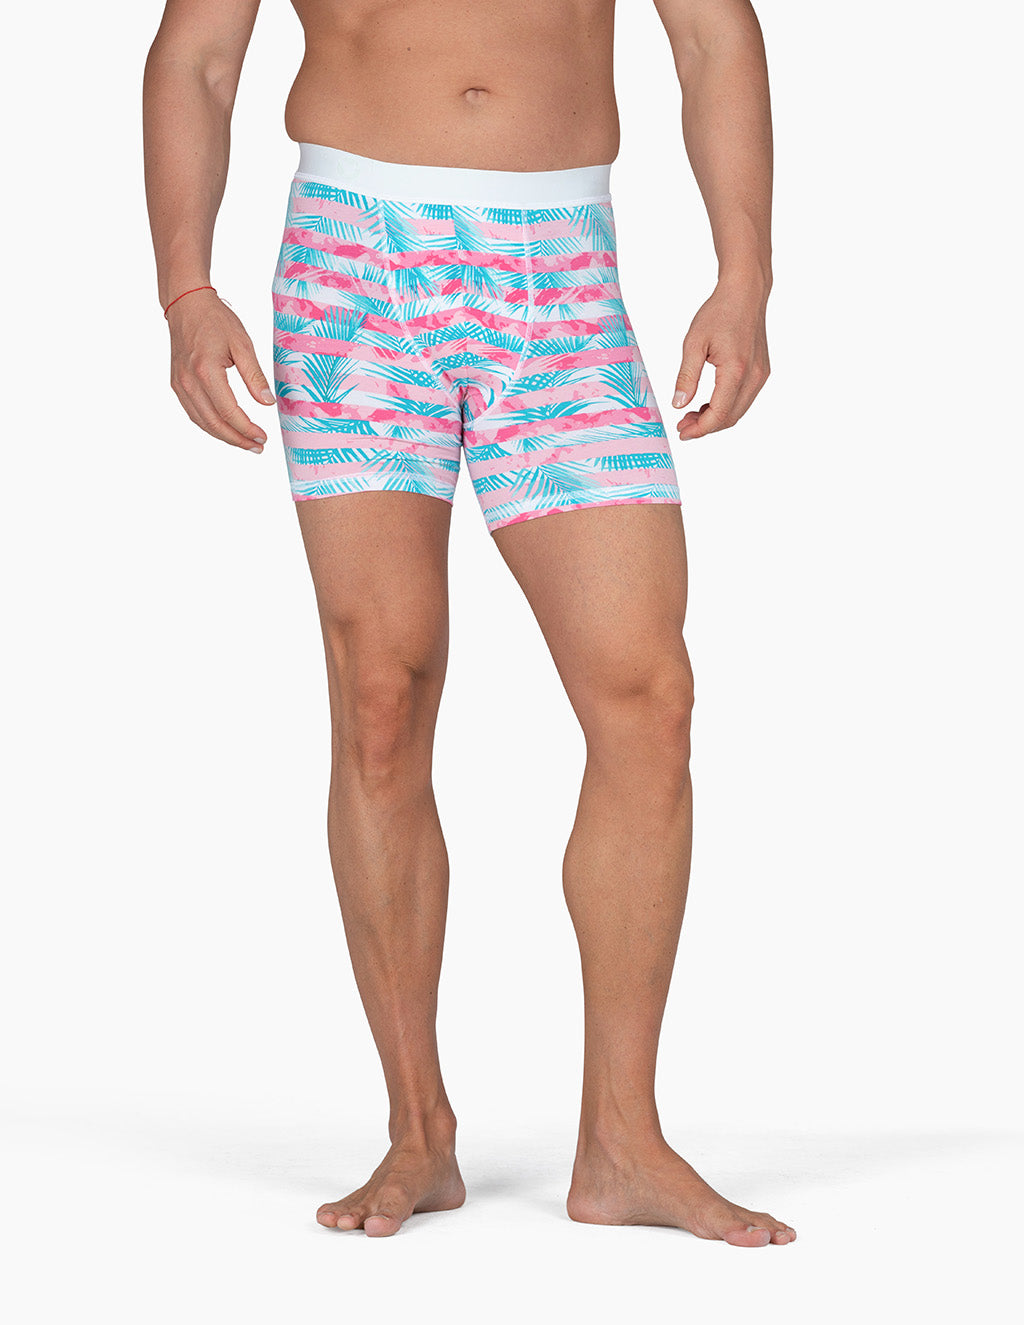 Mack Weldon's Insanely Popular Boxer Briefs Are Back in Stock Right Now